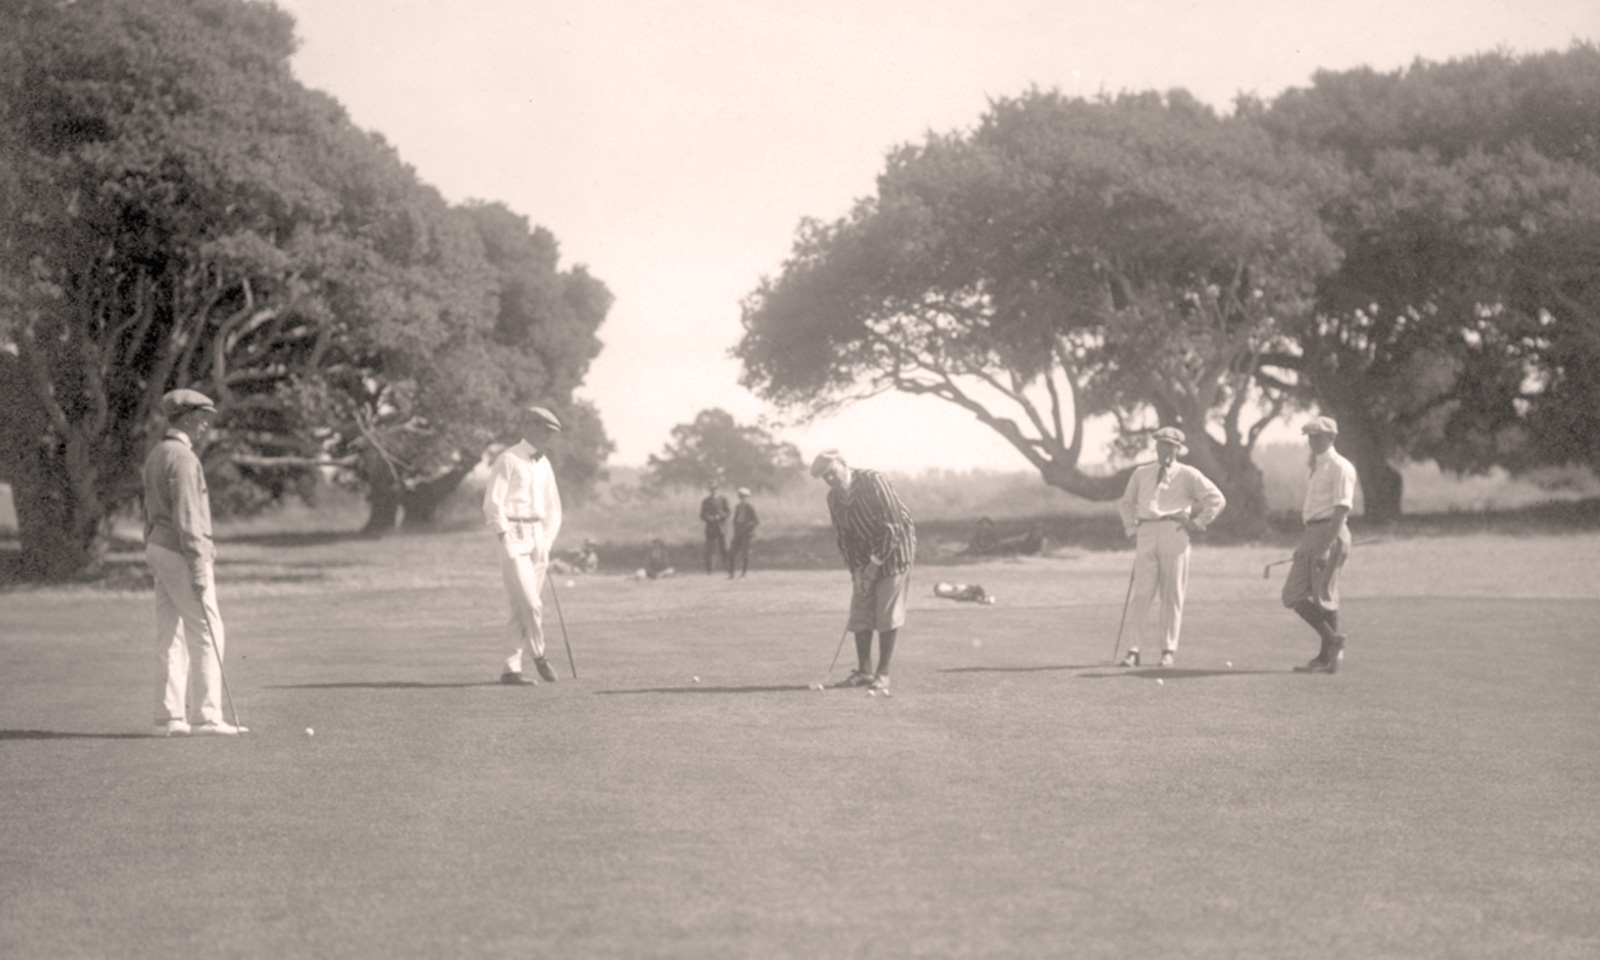 During an August 1910 practice round for the Del Monte Cup Championship, a cameraman caught these young golfers playing in a five-some. From left to right, Charles Templeton (grandson of railroad baron Charles Crocker); Jack Neville (who would later co-design Pebble Beach Golf Links and win a record five California Amateurs); Albert S. Lilly (of Standard Oil); Vincent Whitney (who, a couple weeks later, won the 1910 Pacific Coast Championship at Del Monte); and Austin H. White (who defeated Whitney in the semifinal match of the 1910 Del Monte Cup, but finished runner-up in the finals).